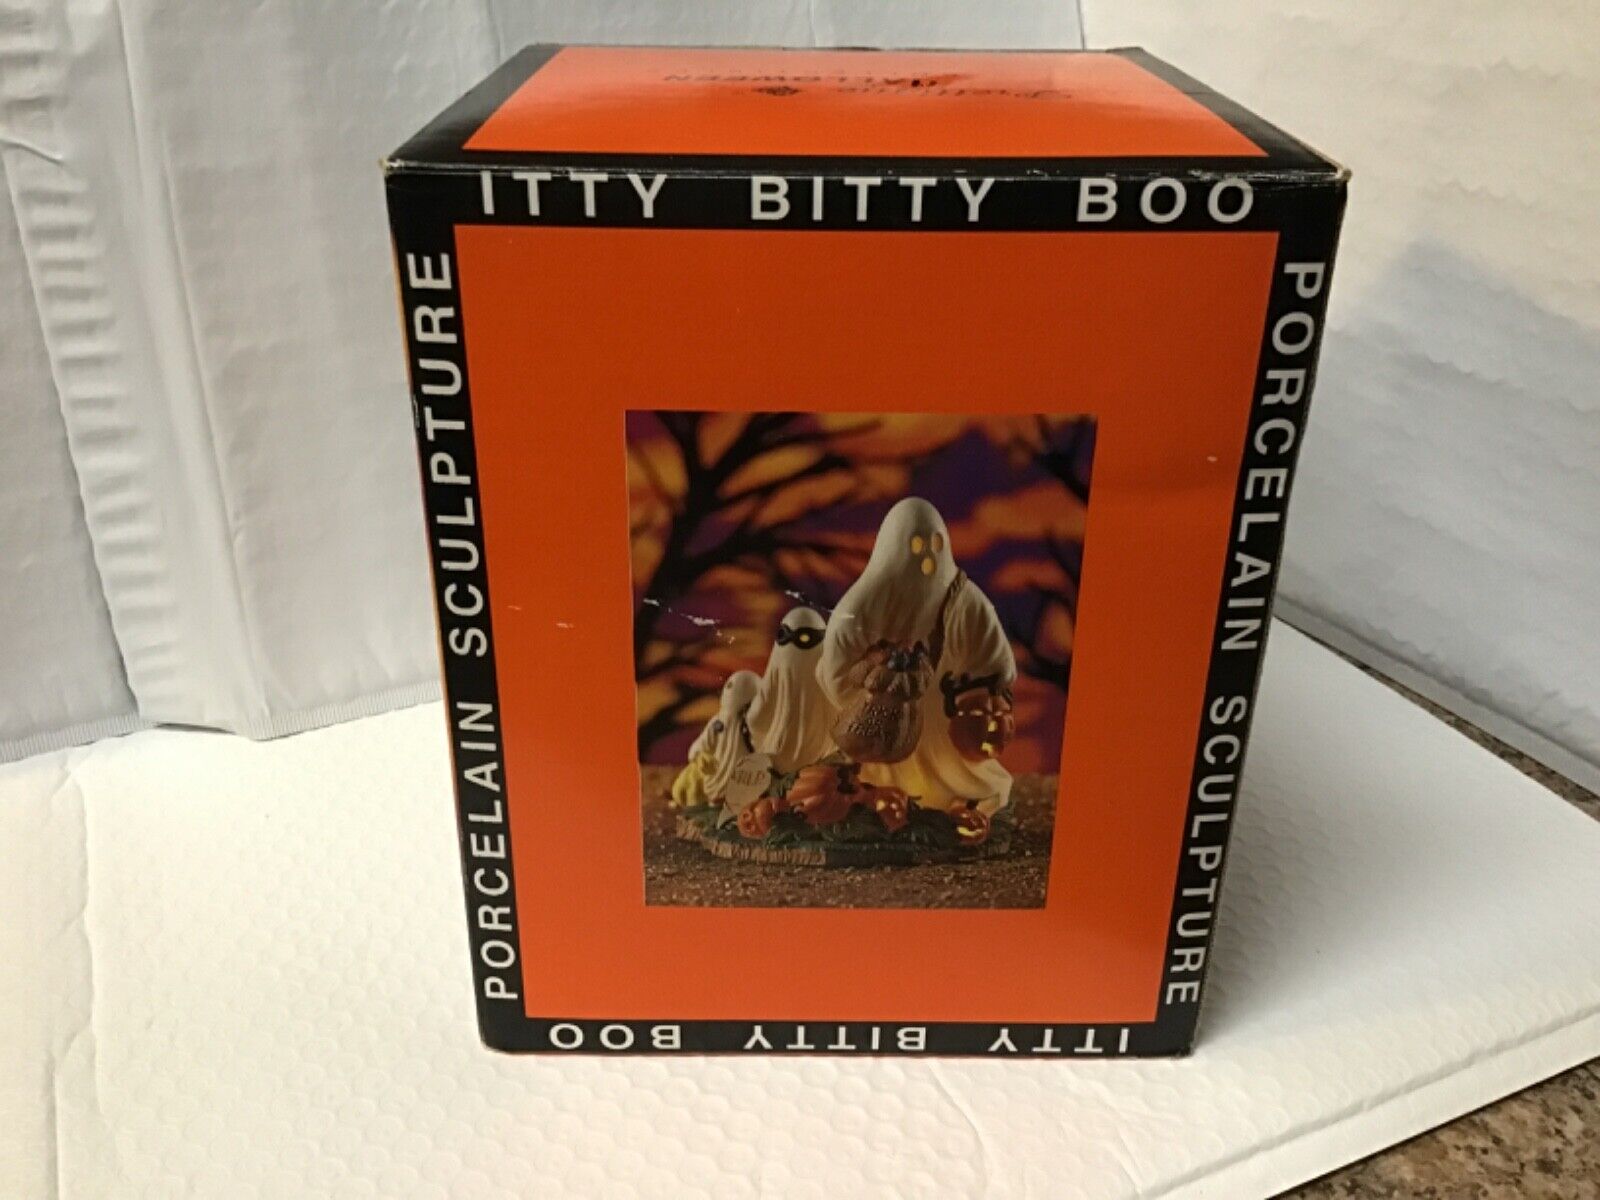 Vintage Prettique Halloween Itty Bitty Boo Porcelain Lighted Ghosts Sculpture